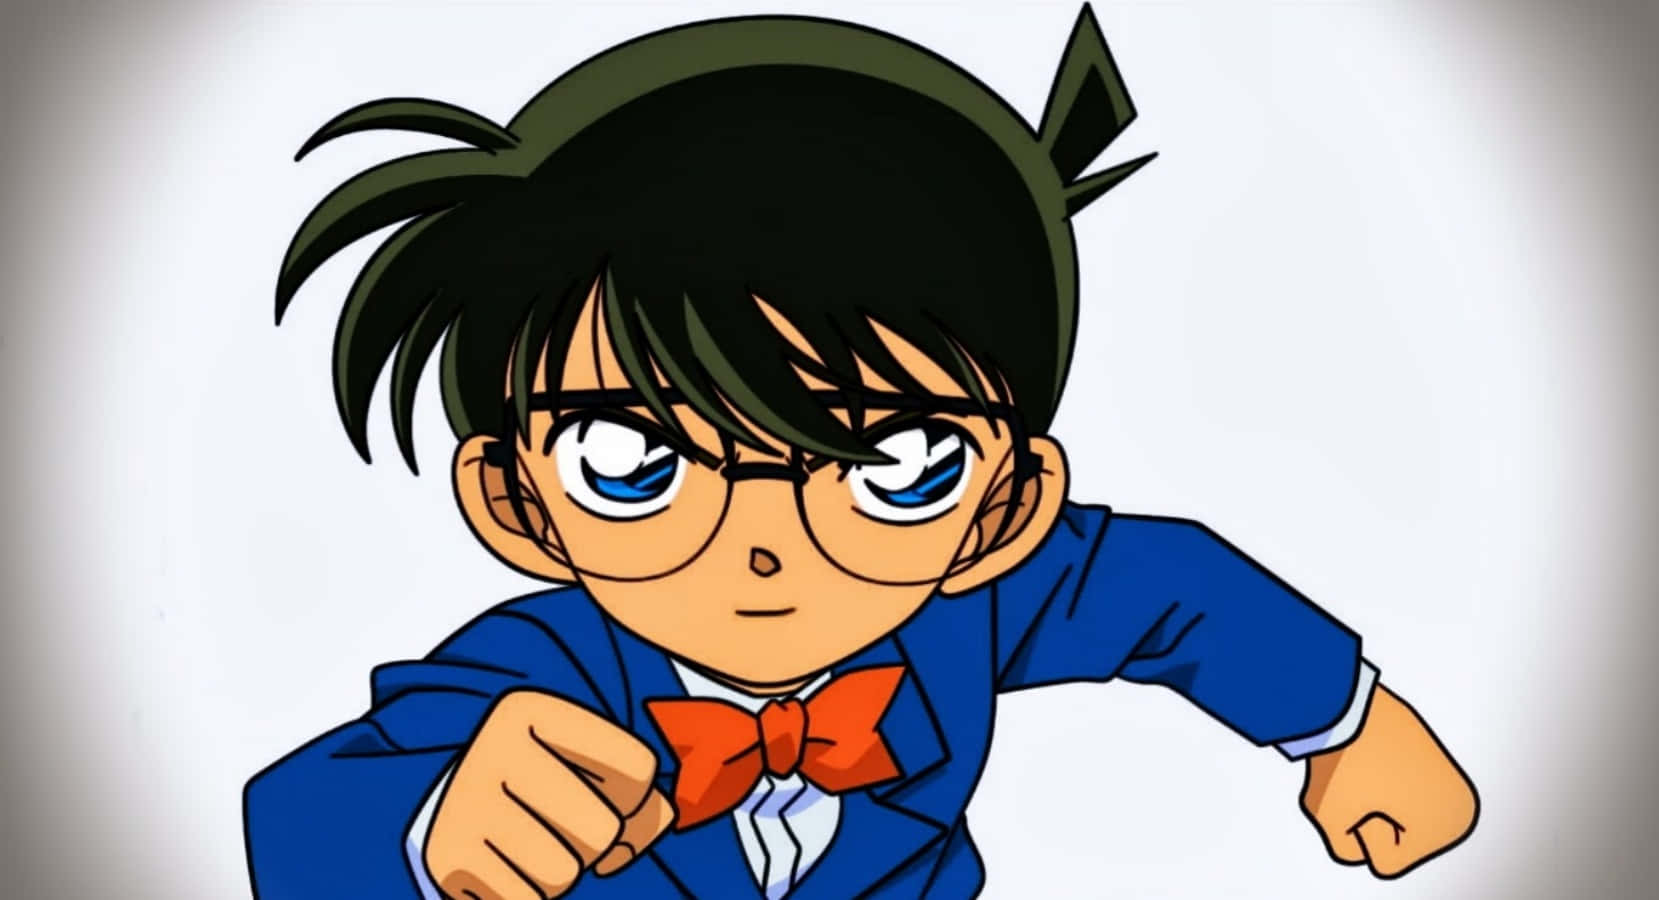 Protecting the innocent – Detective Conan says no to crime